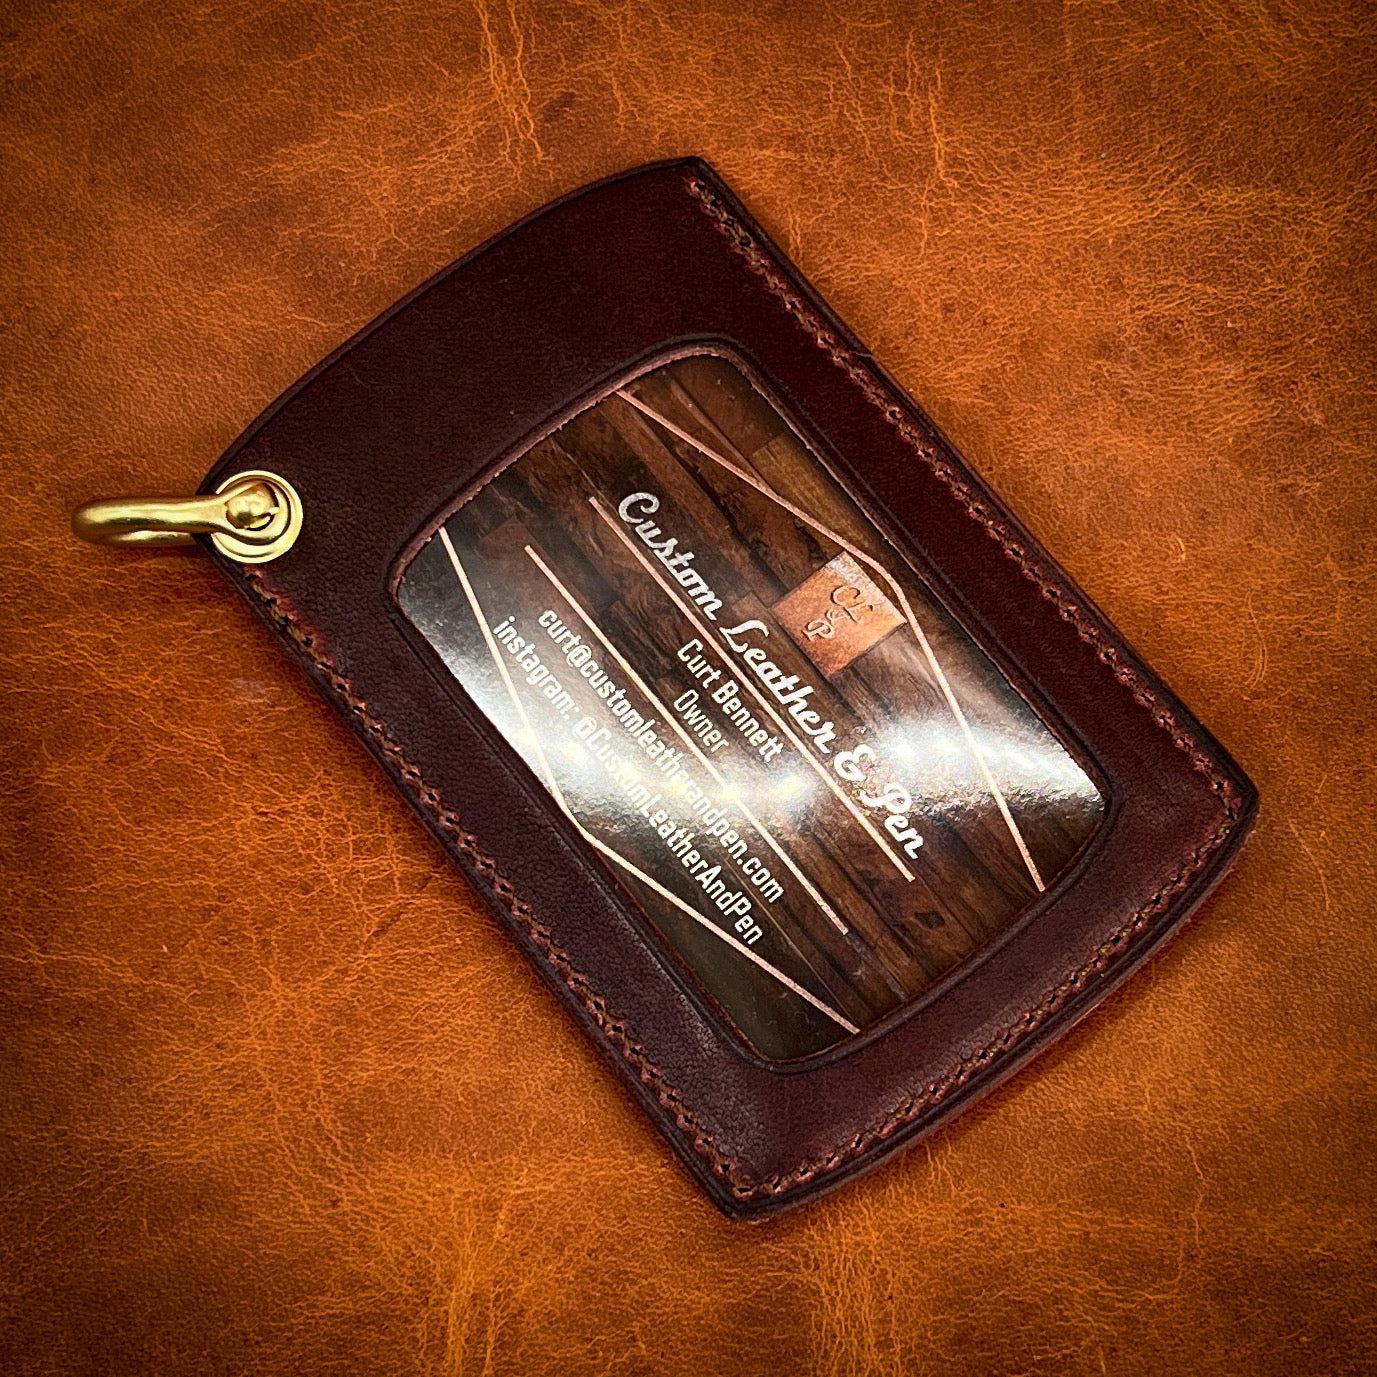 Edc3 Minimalist Wallet in Horween Leather | Hand Made to Order and Personalized Standard - 4 Card Capacity